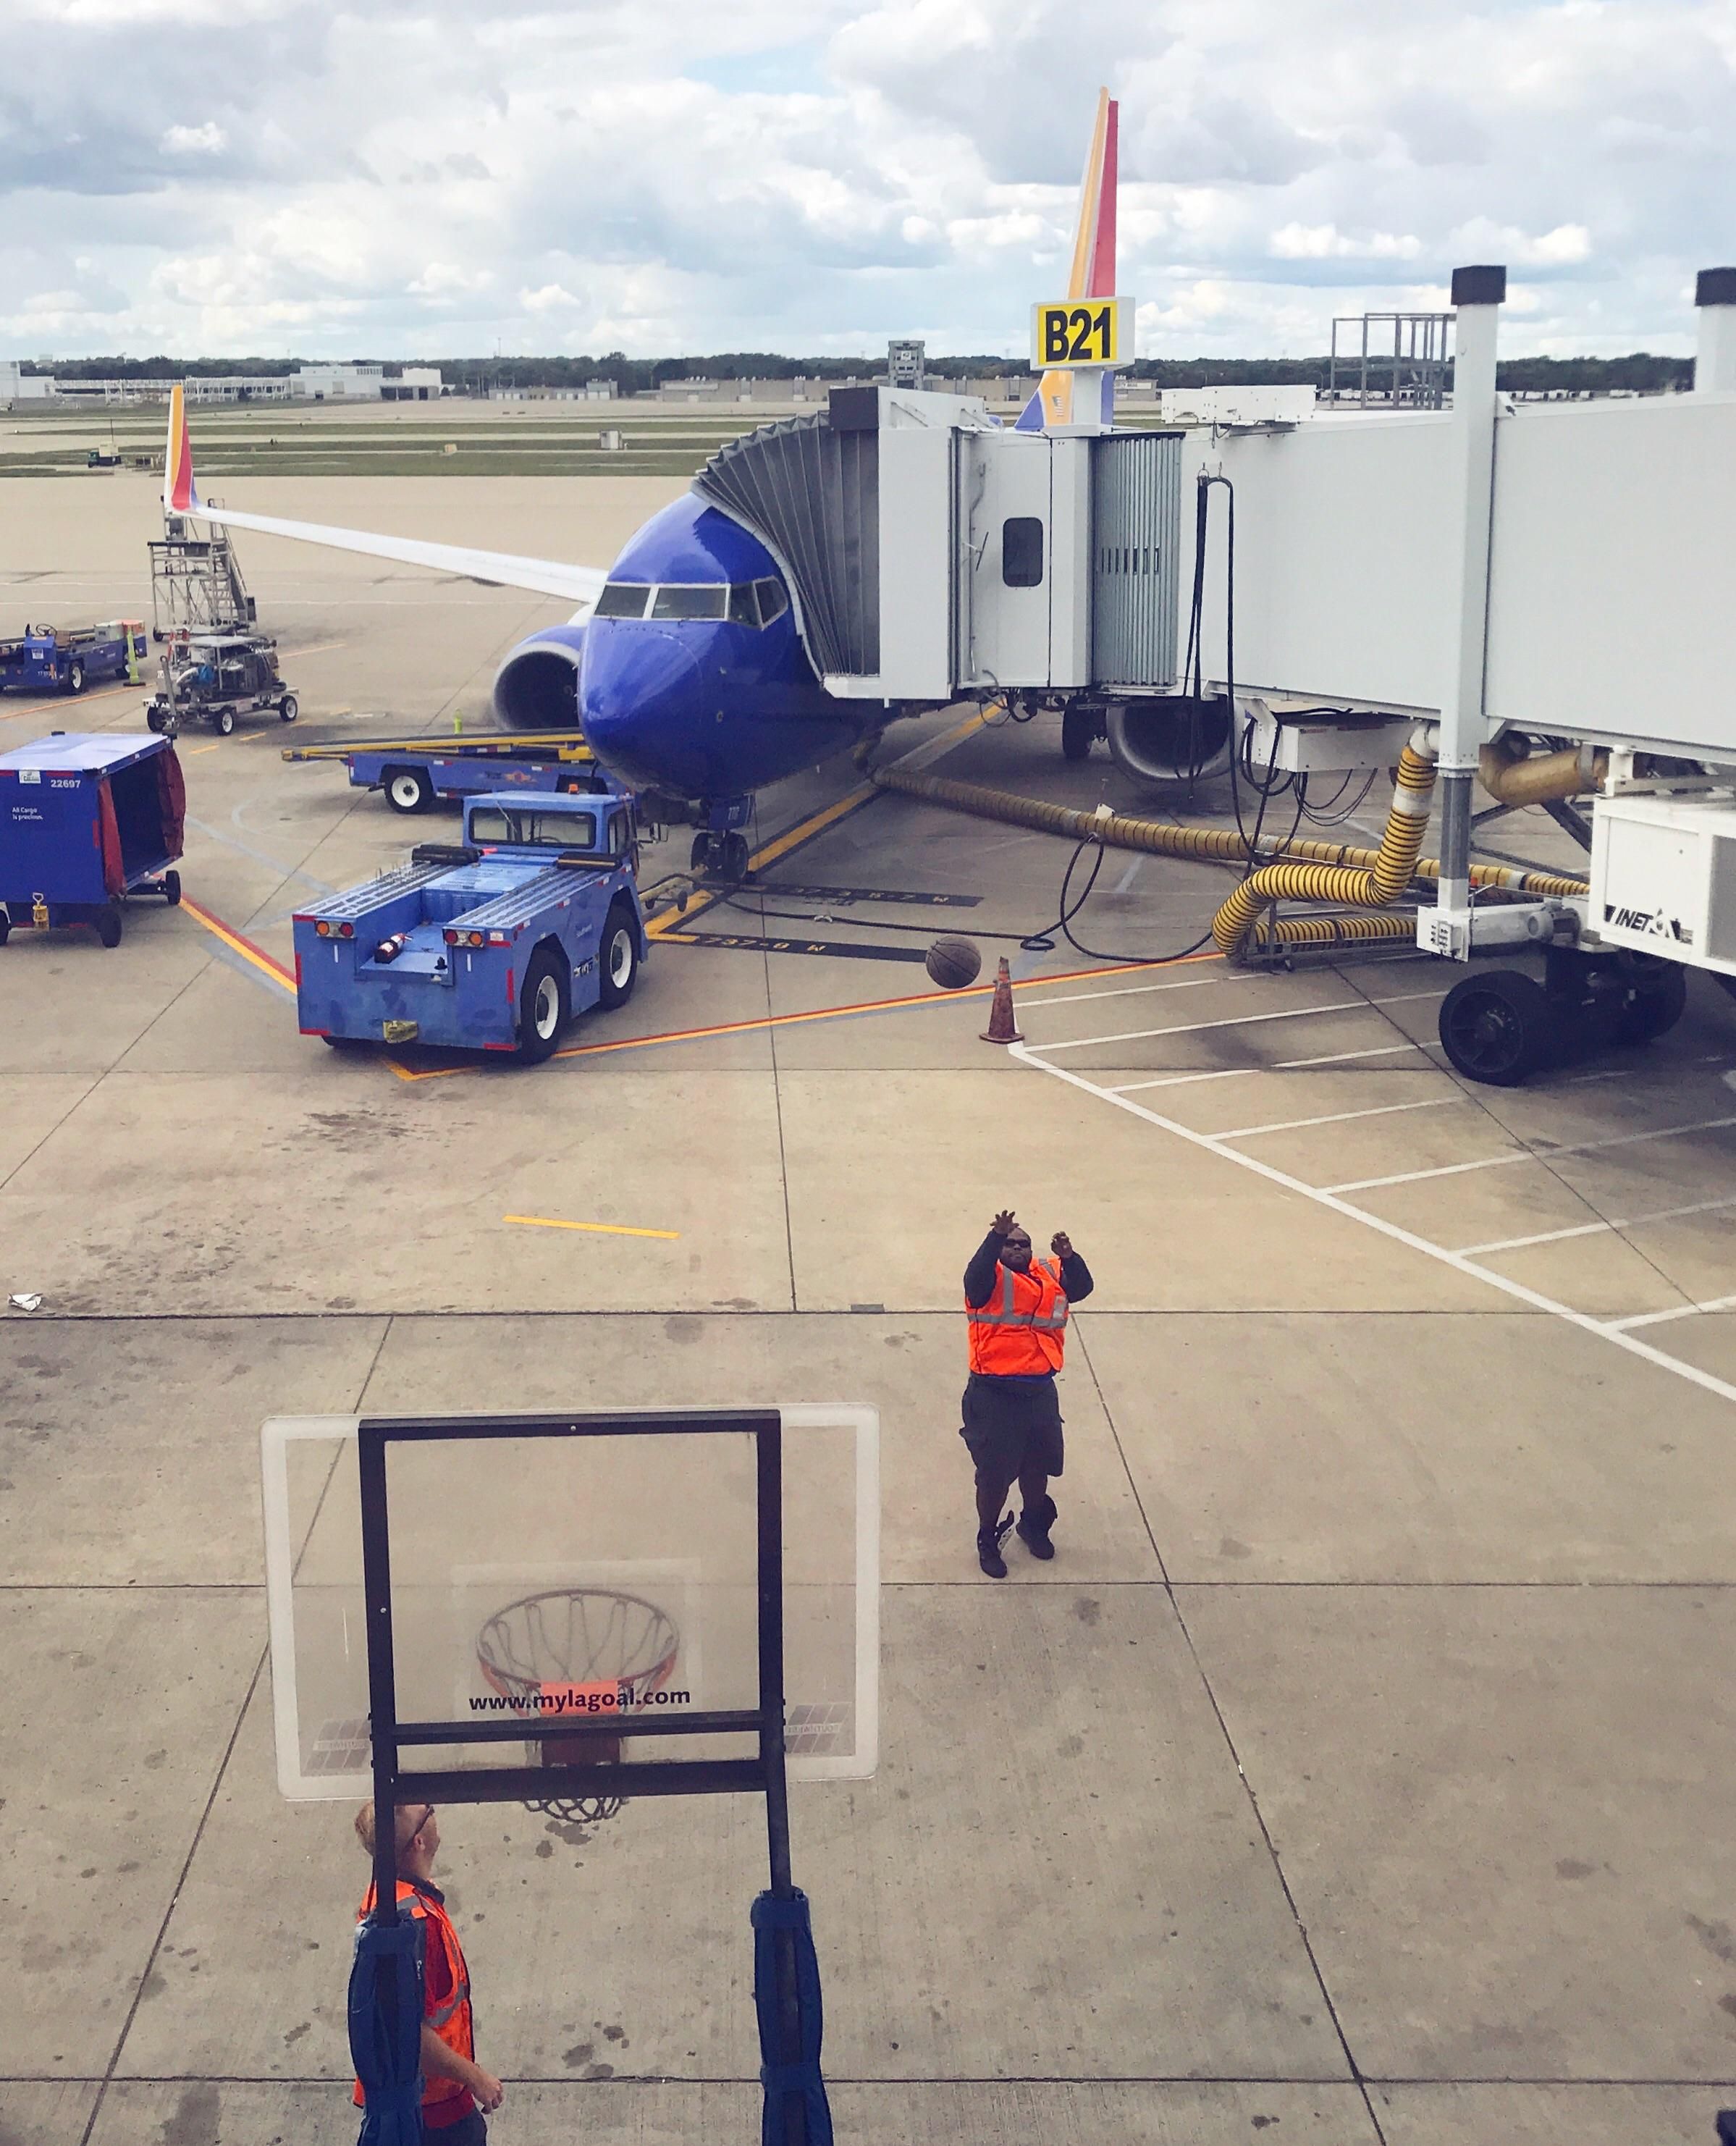 In Indiana you know it's gonna be a long flight delay when the ground crew breaks out the basketball.